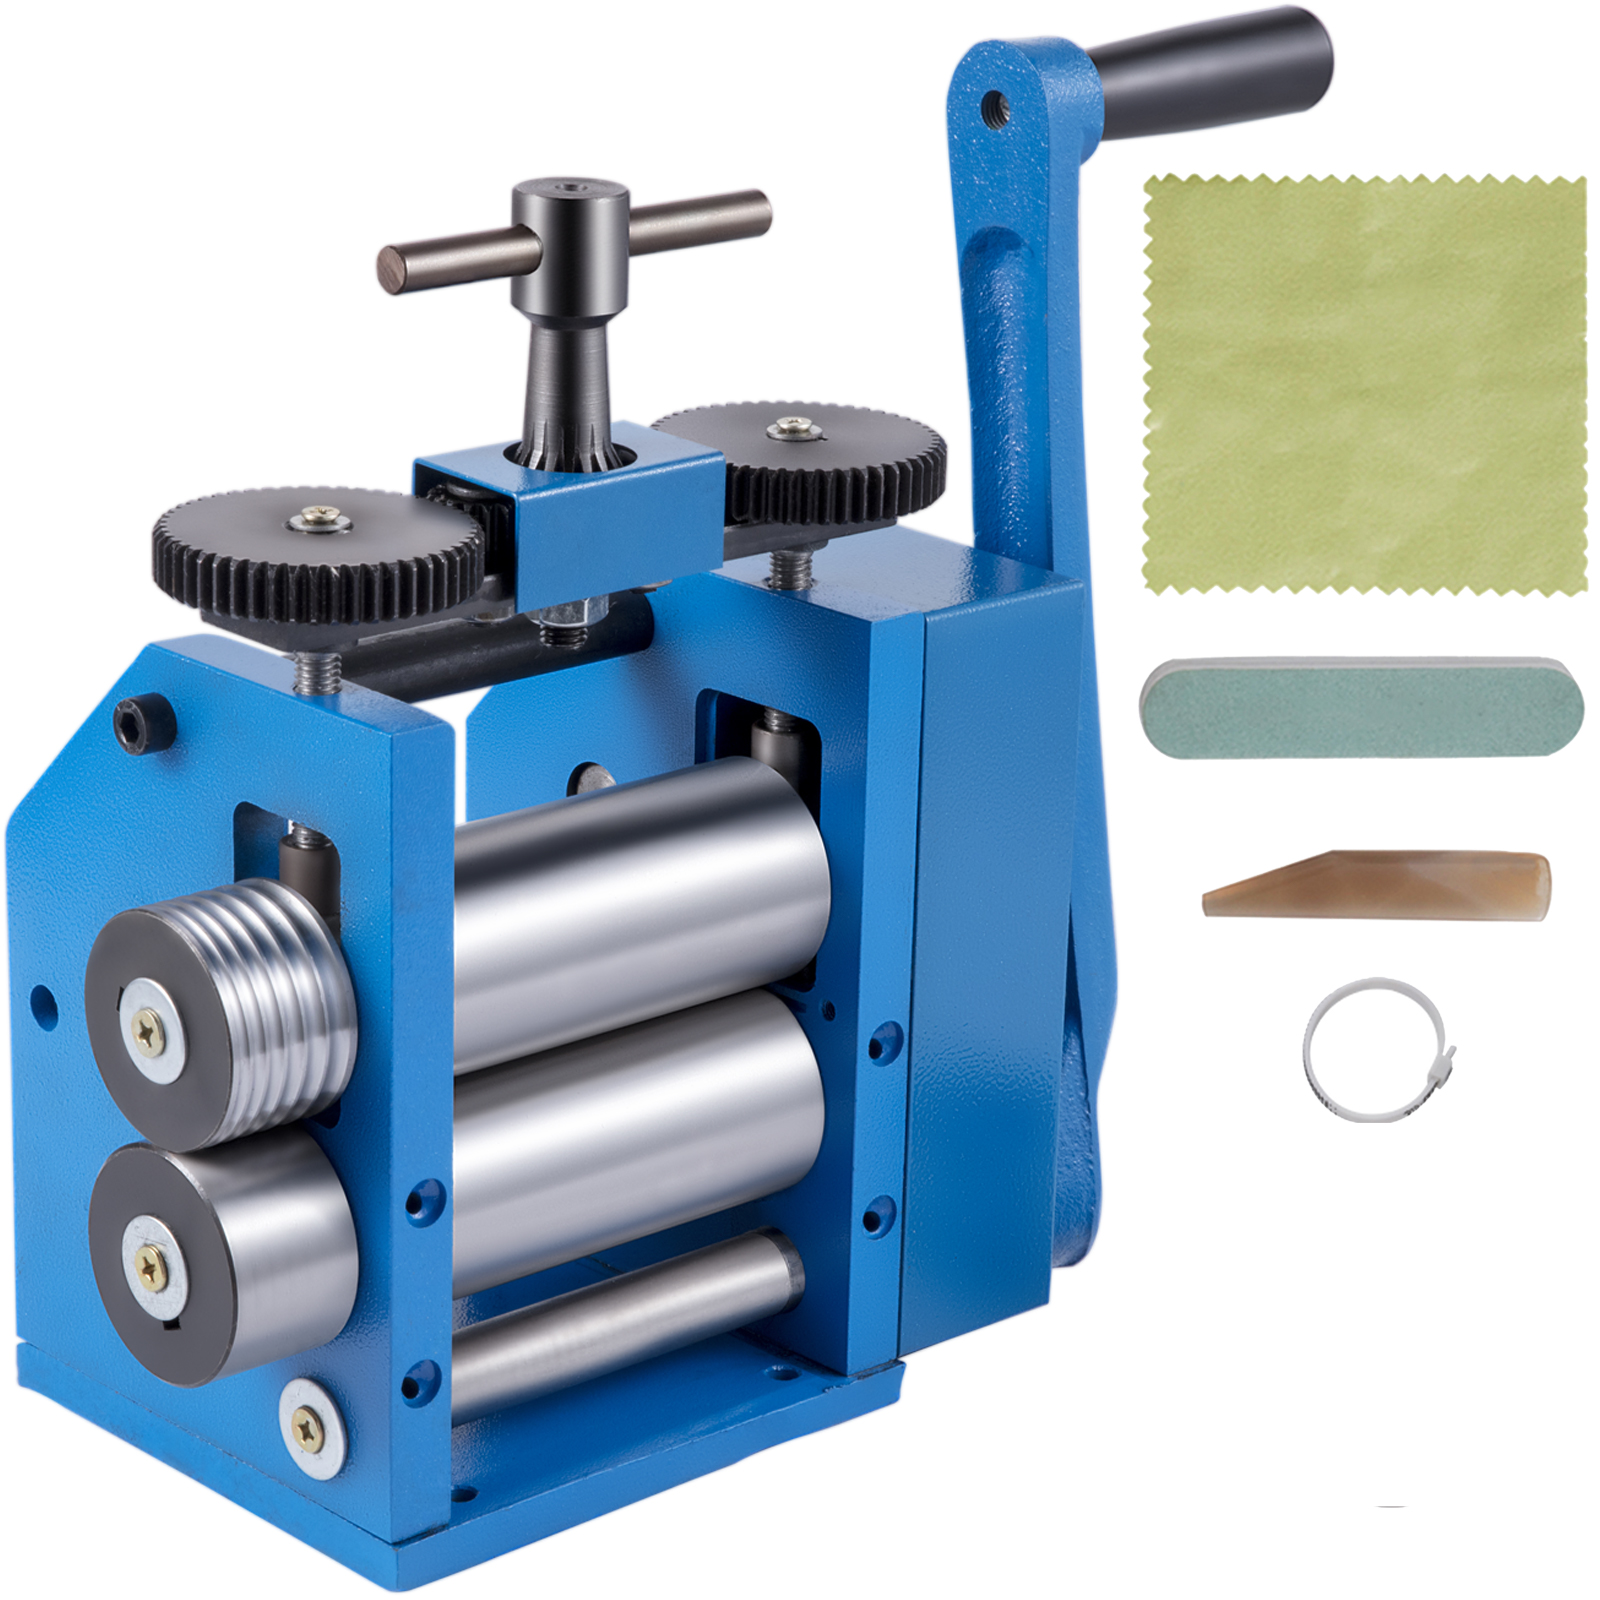 220V Electric rolling mill for jewelry gold silver making